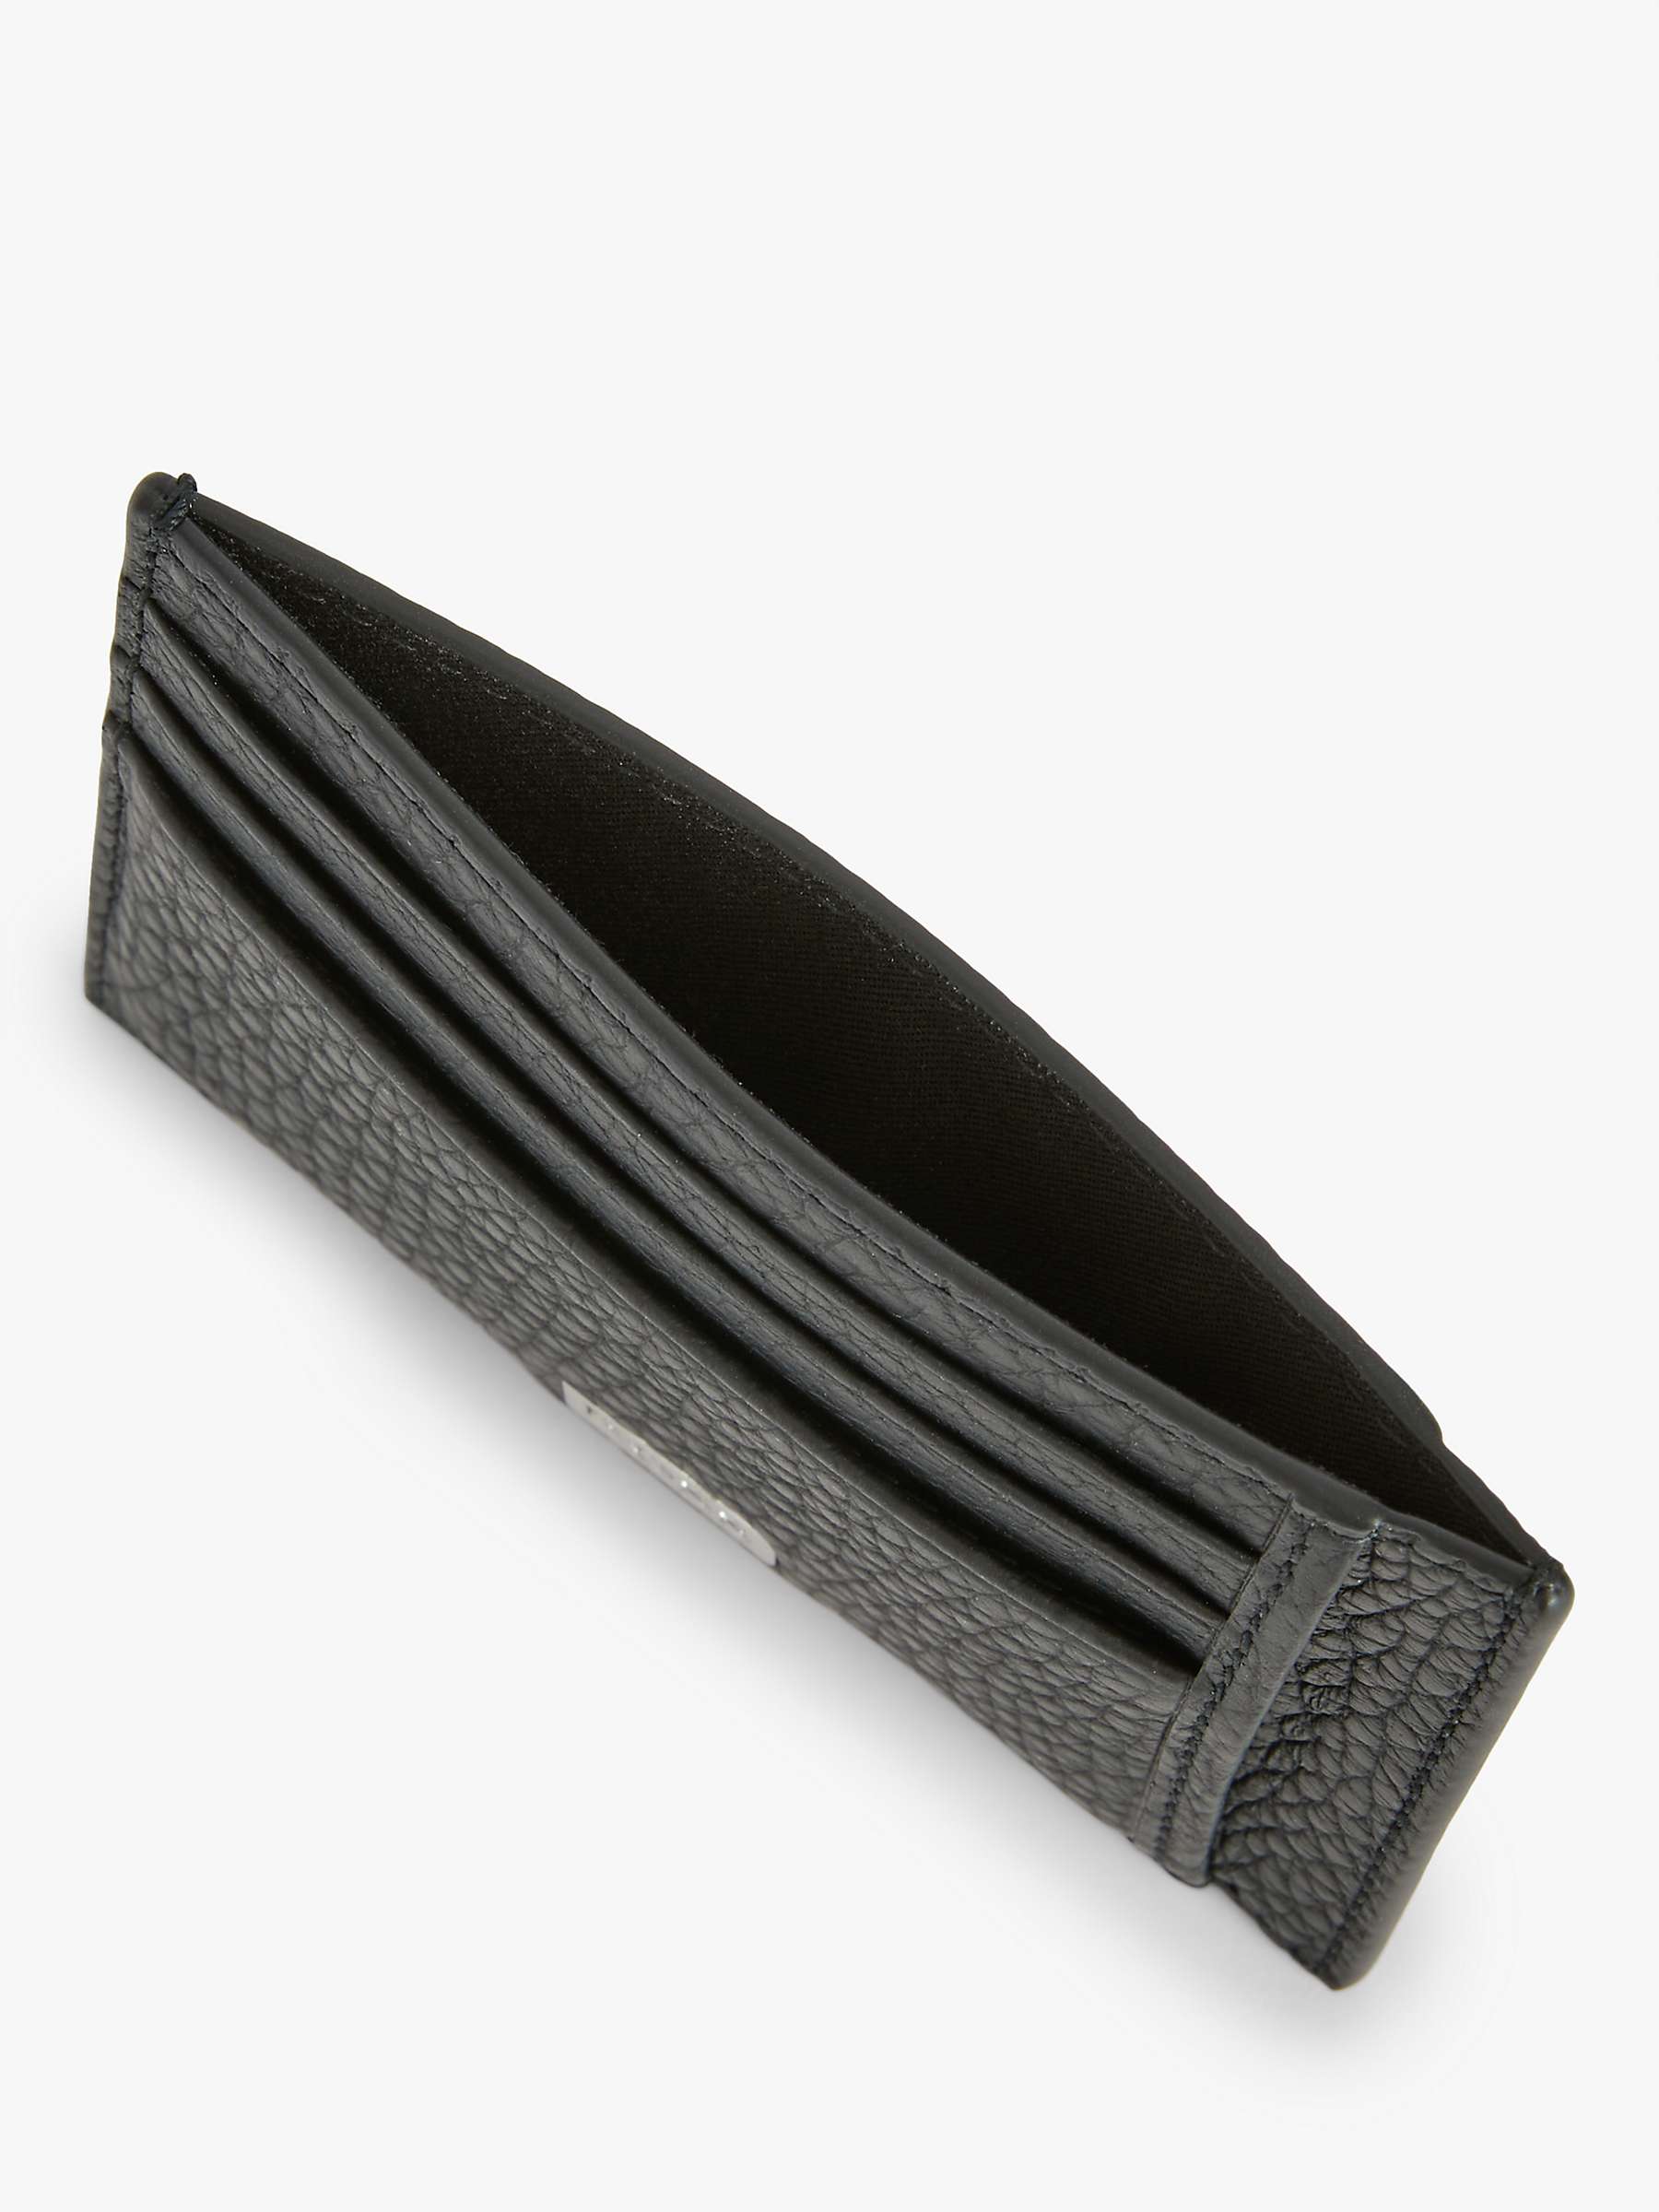 Buy BOSS Crosstown Grained Italian Leather Eight Card Wallet, Black Online at johnlewis.com